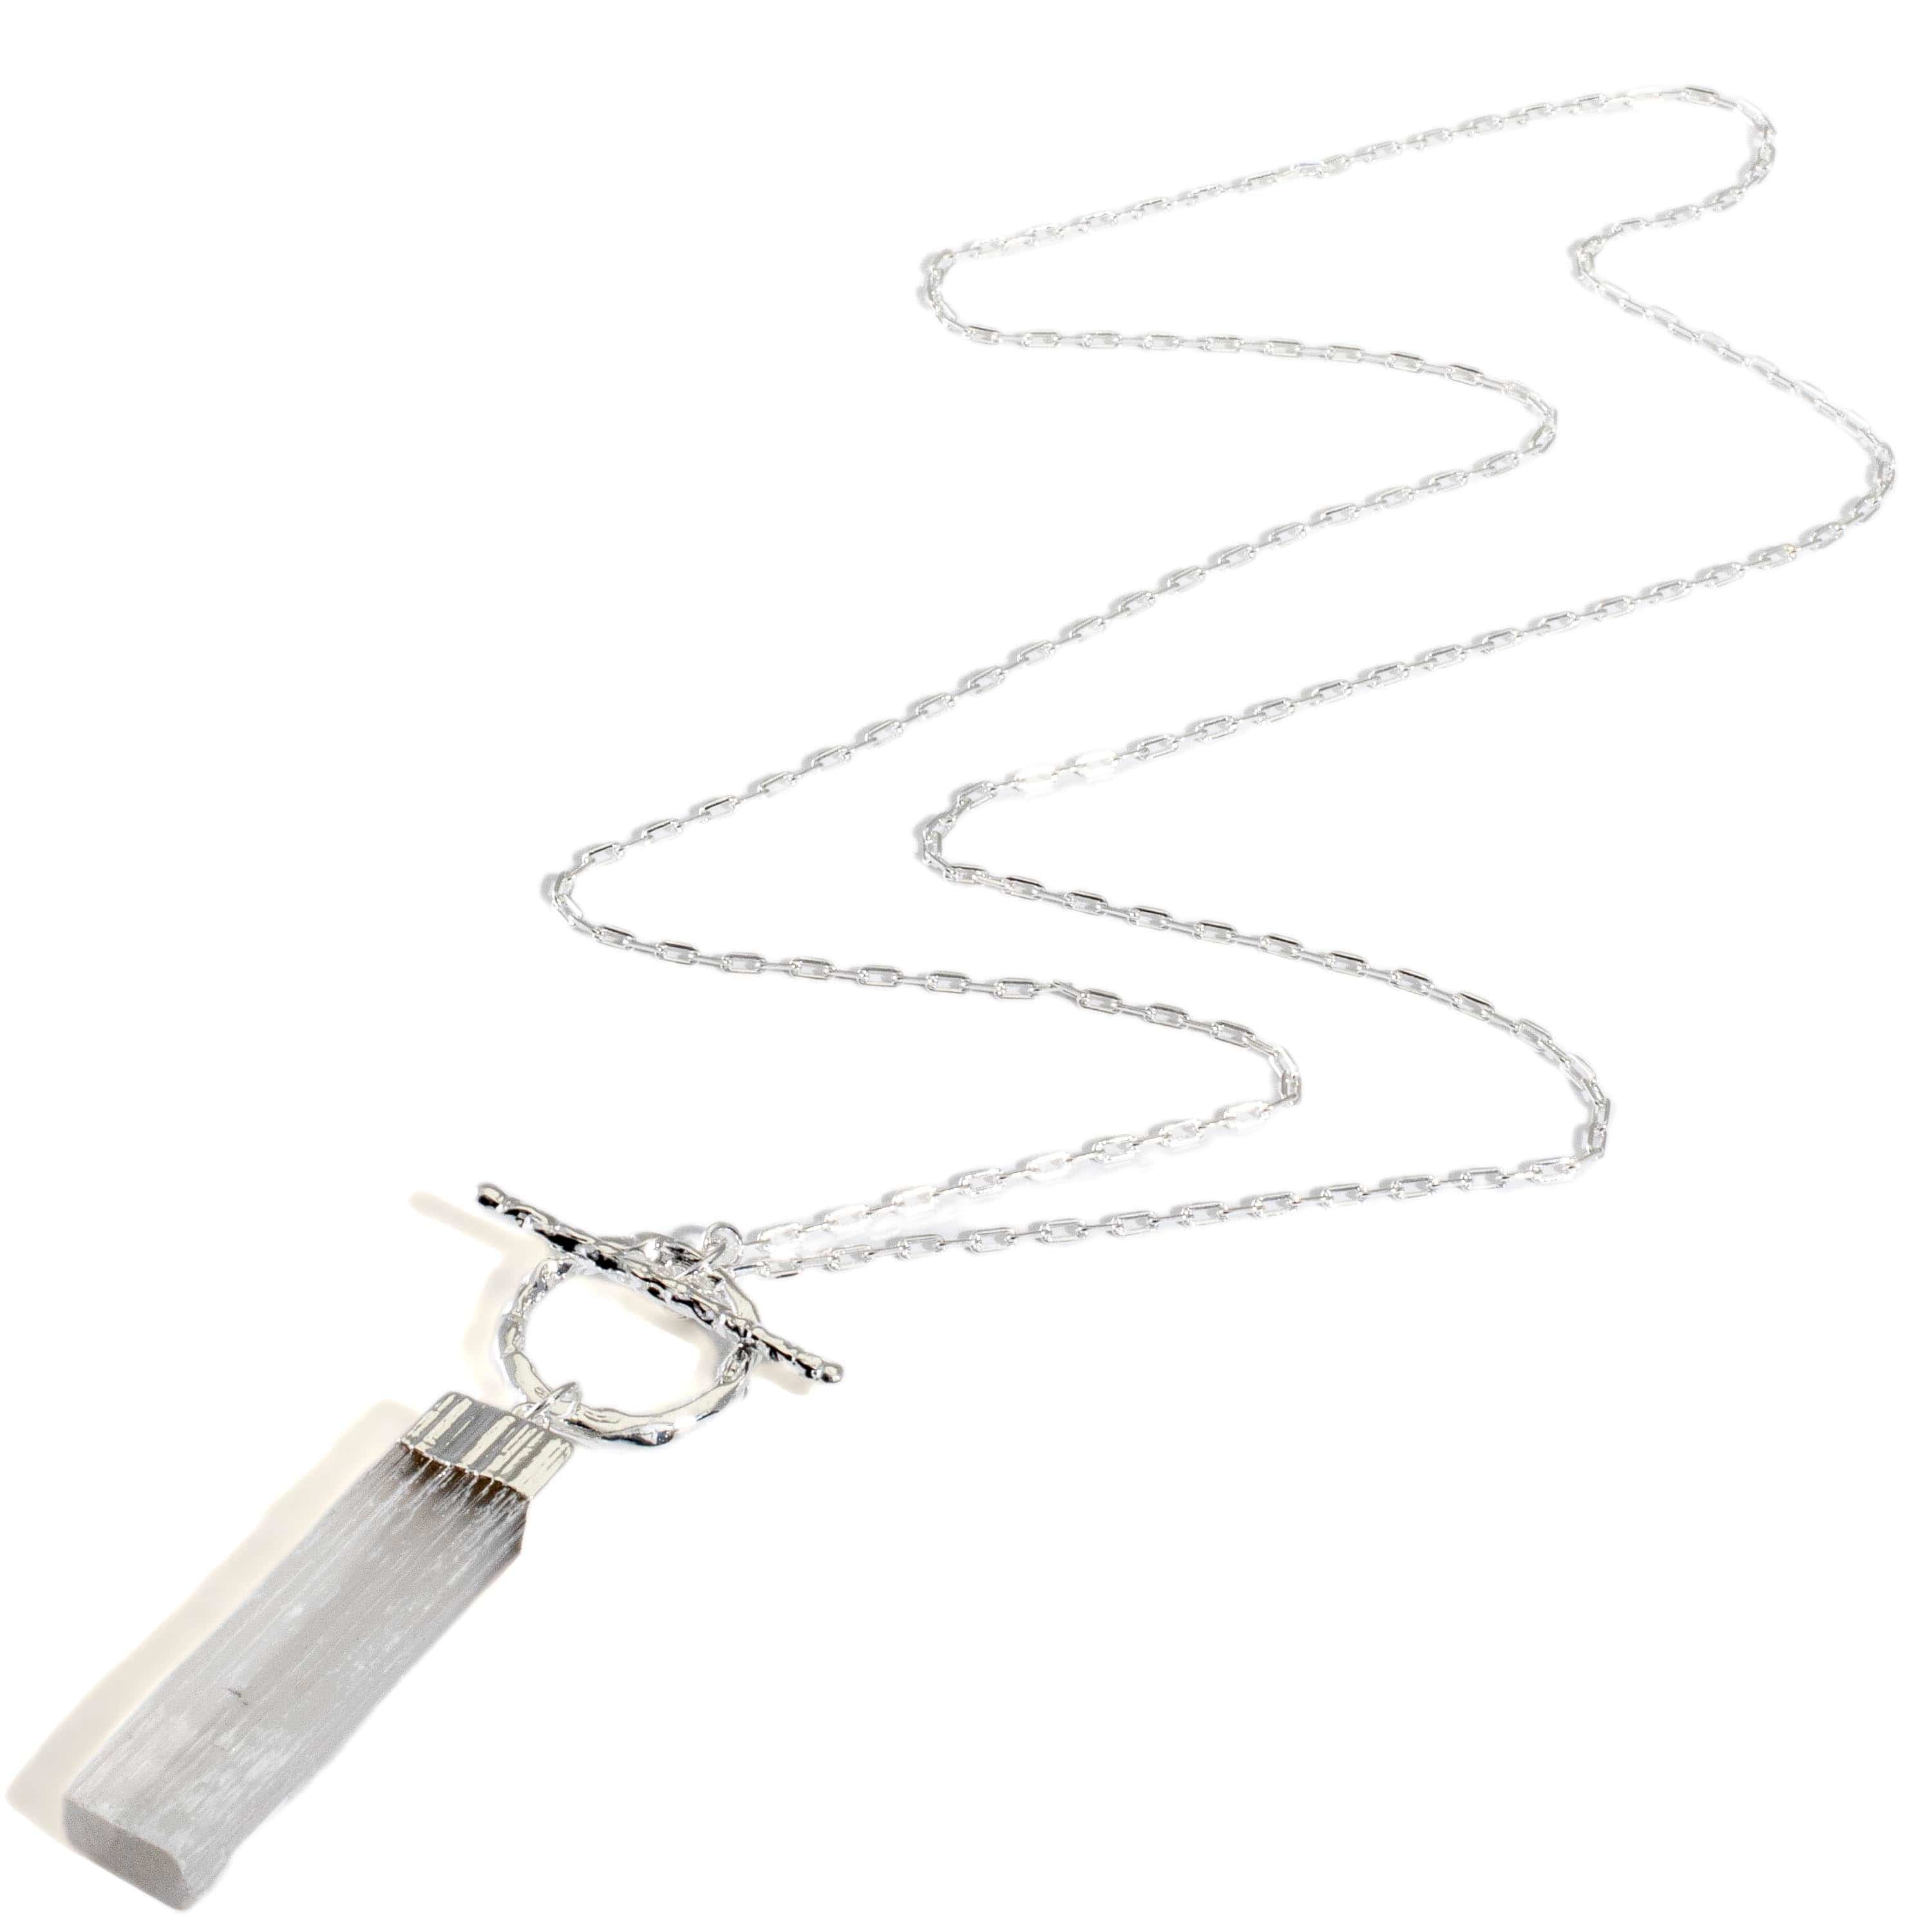 Kalifano Crystal Jewelry Selenite Necklace with Toggle Clasp CJN-2021-SL